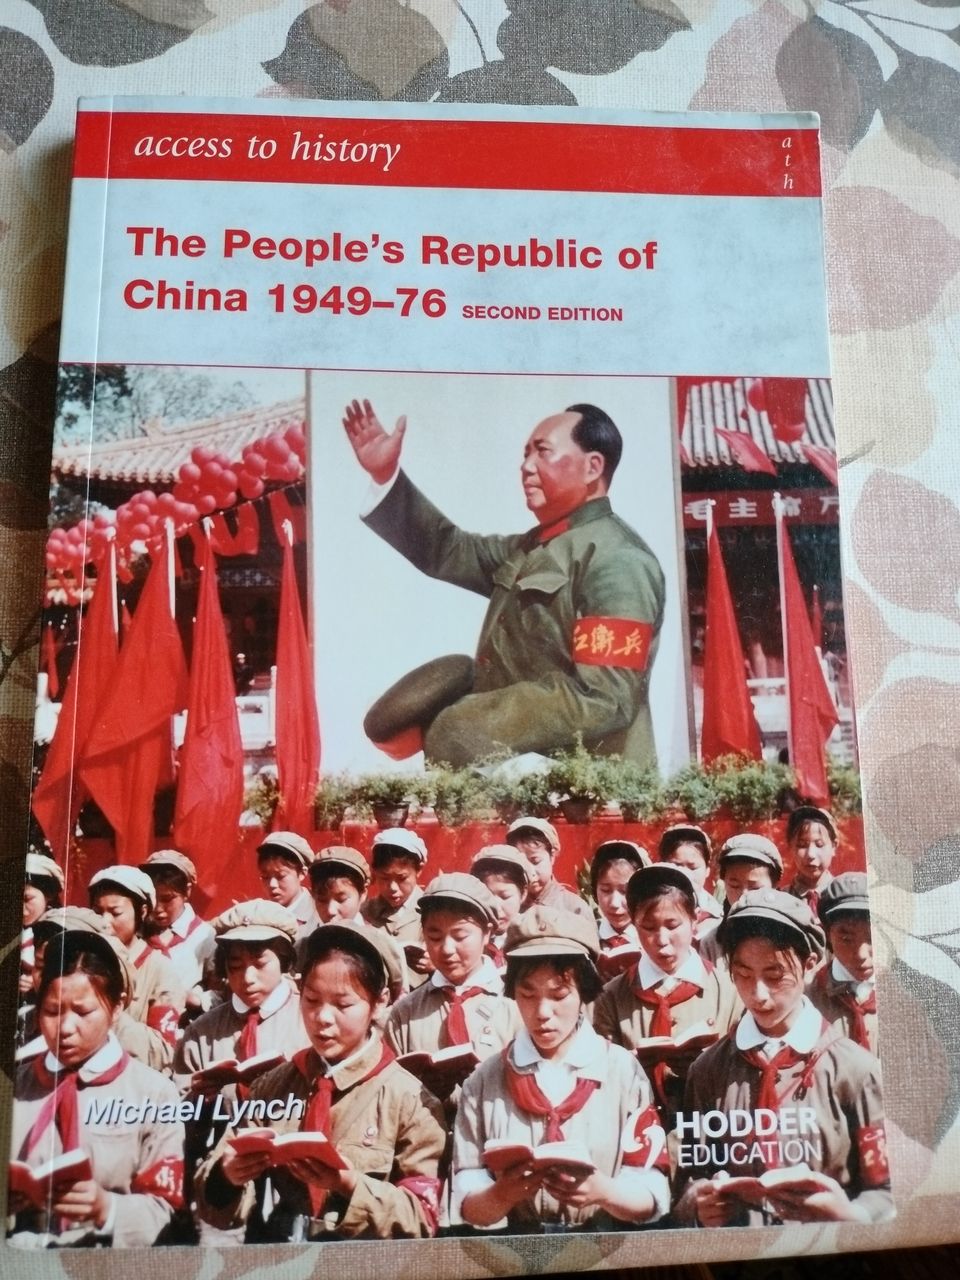 The People's Republic of China 1949-76